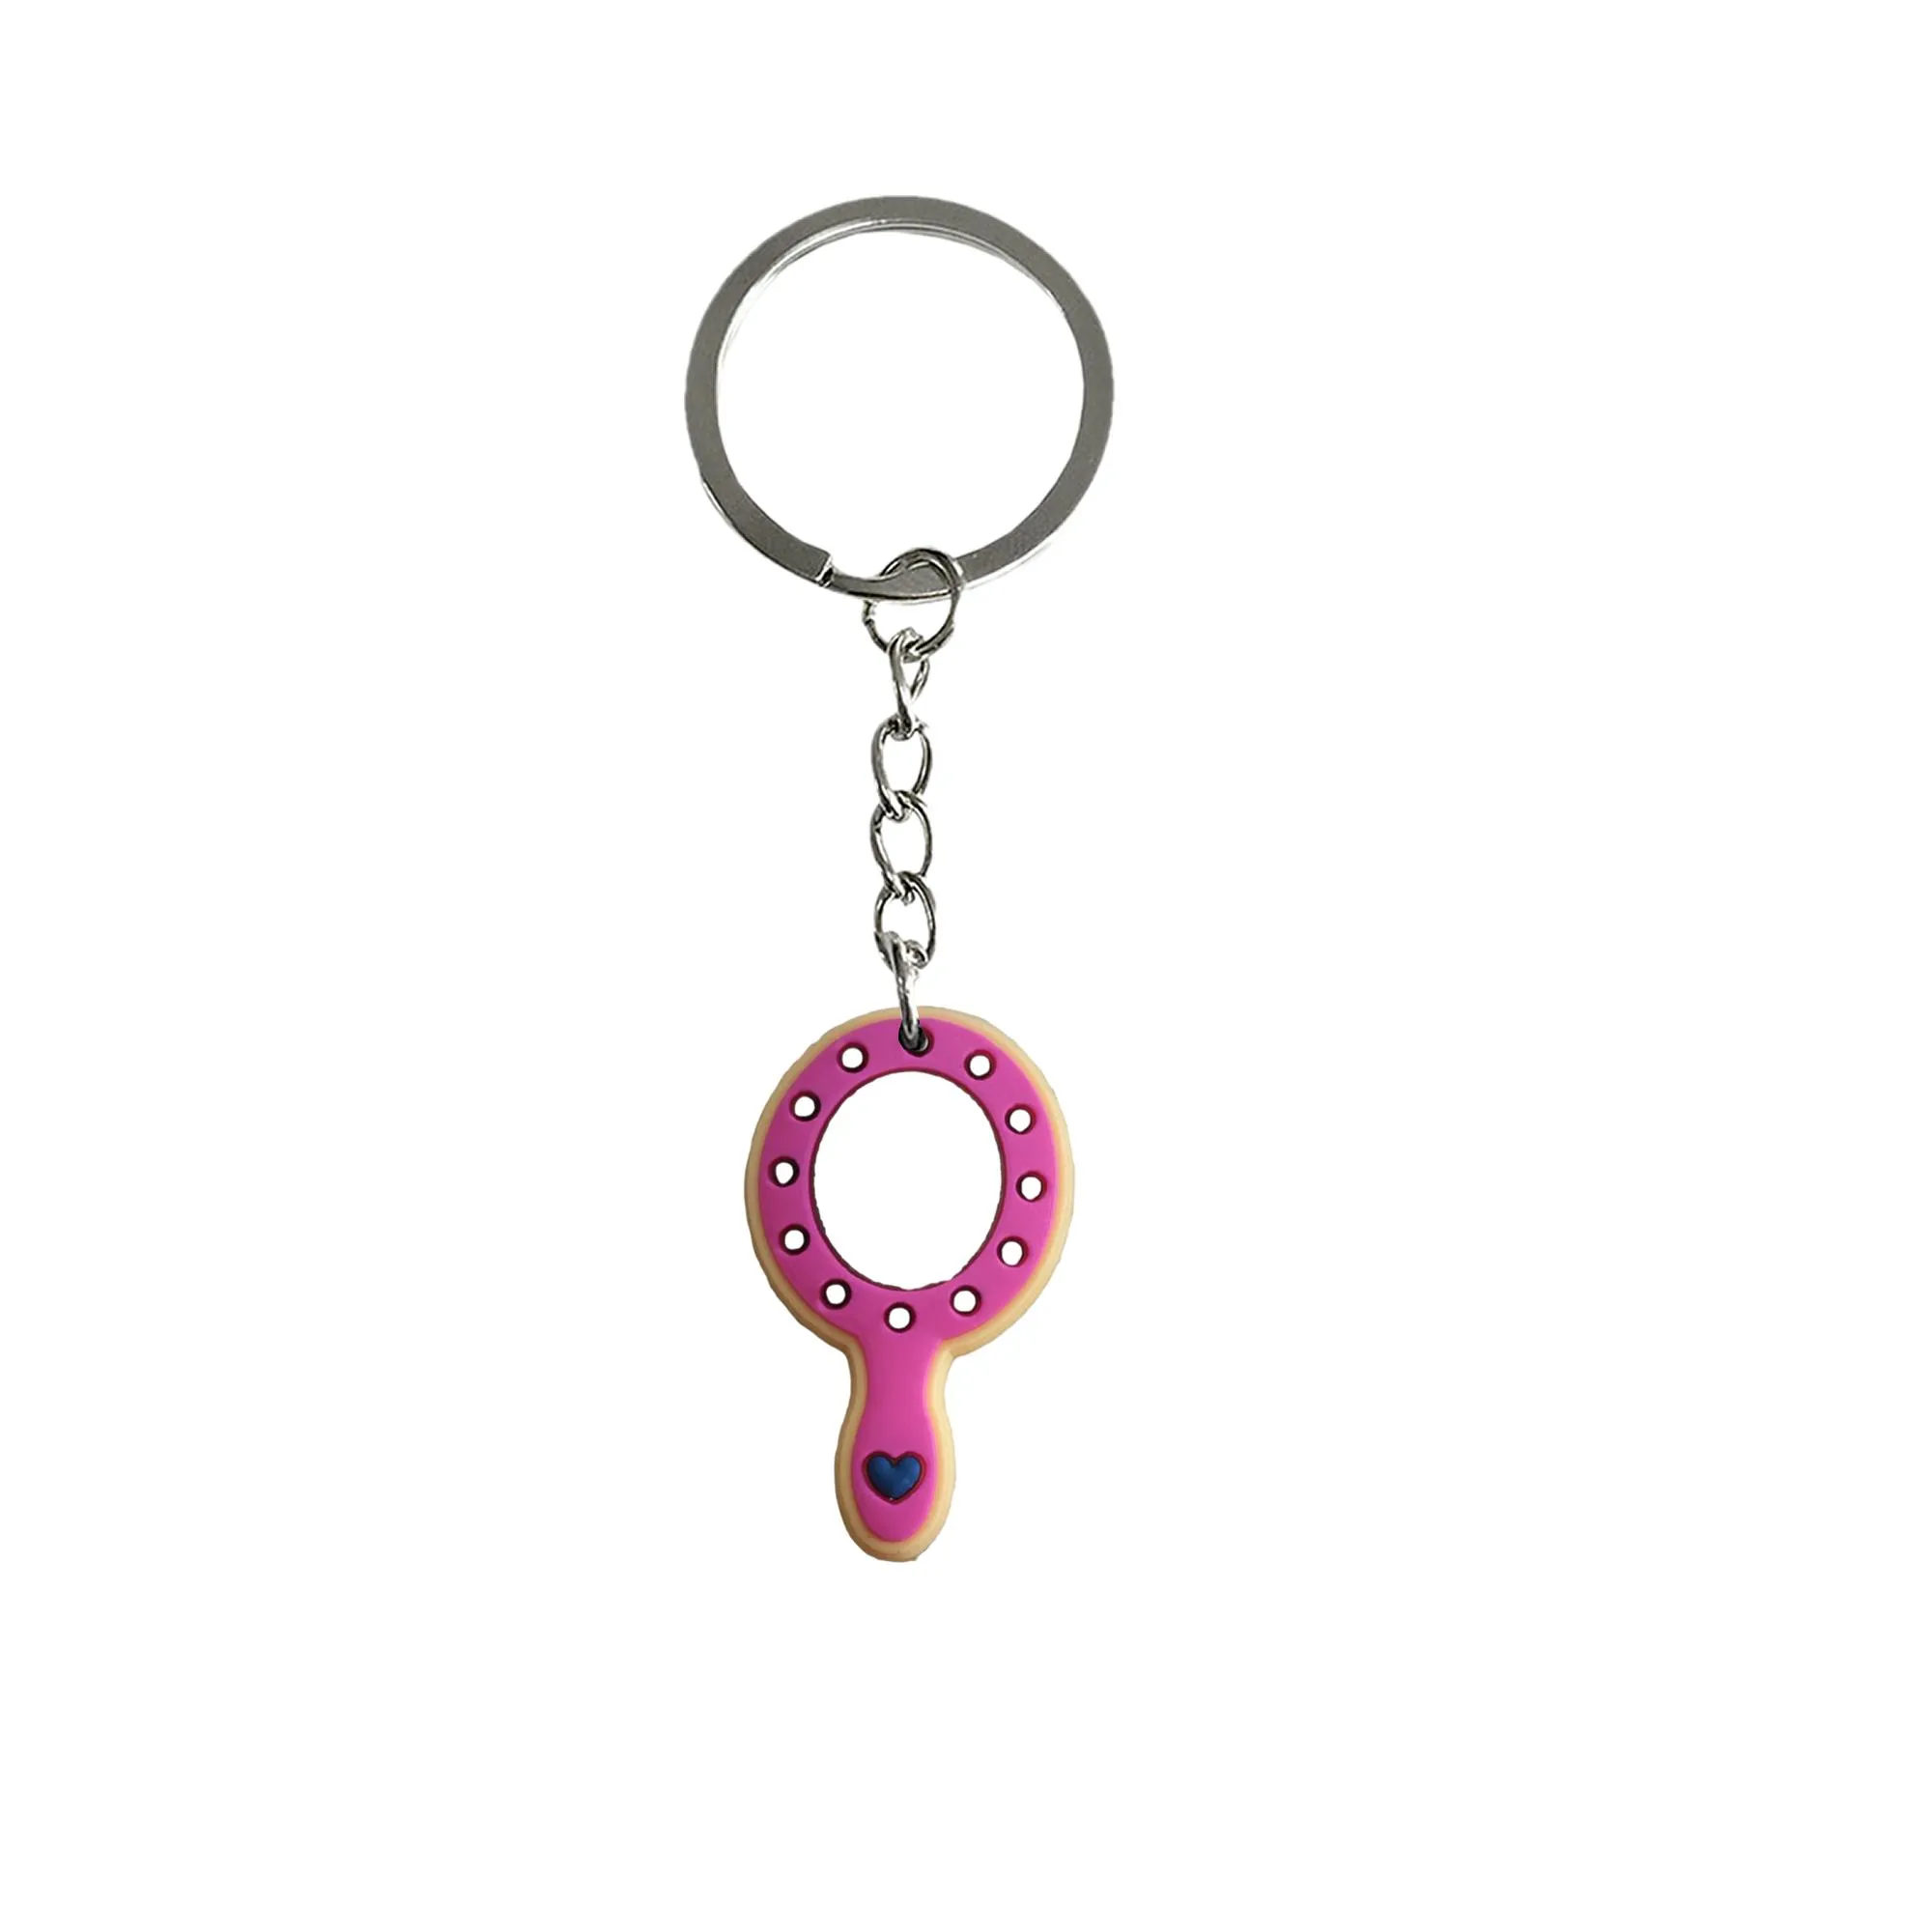 pink  26 keychain key pendant accessories for bags keychains boys keyring classroom school day birthday party supplies gift suitable schoolbag favors men pendants kids